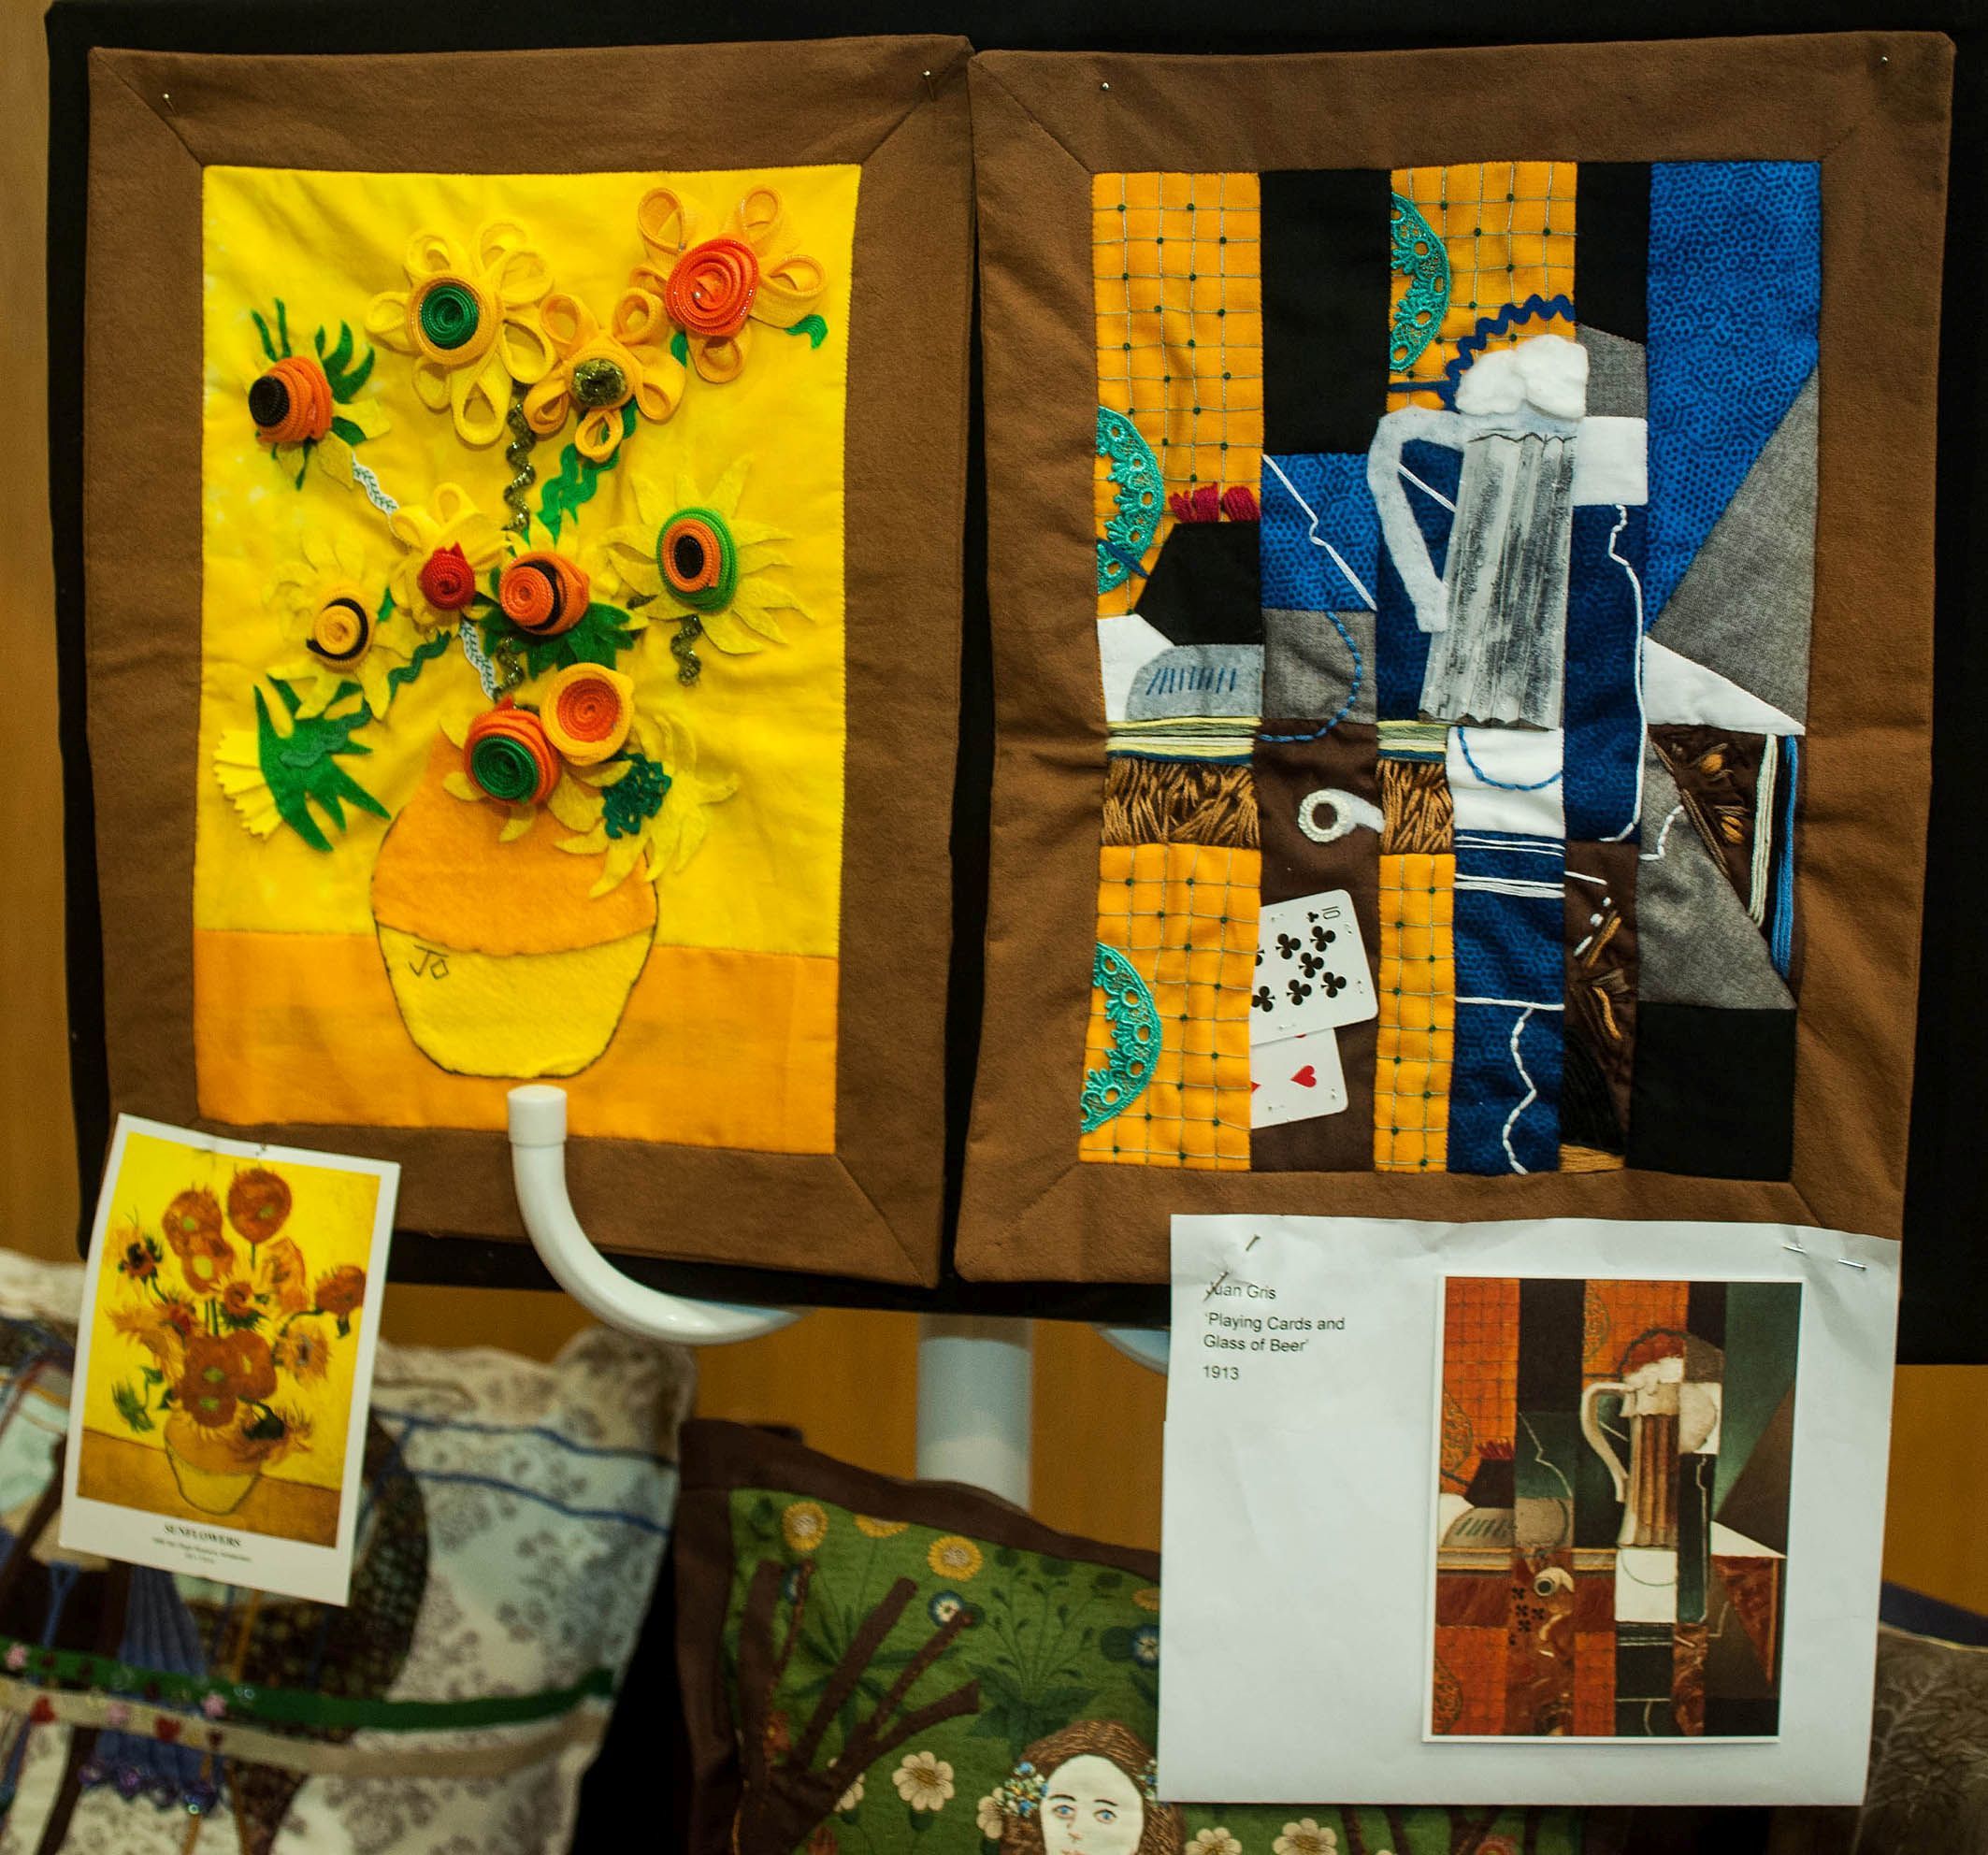 Quilts inspired by famous works of art were also featured. Picture by Colin Higgs